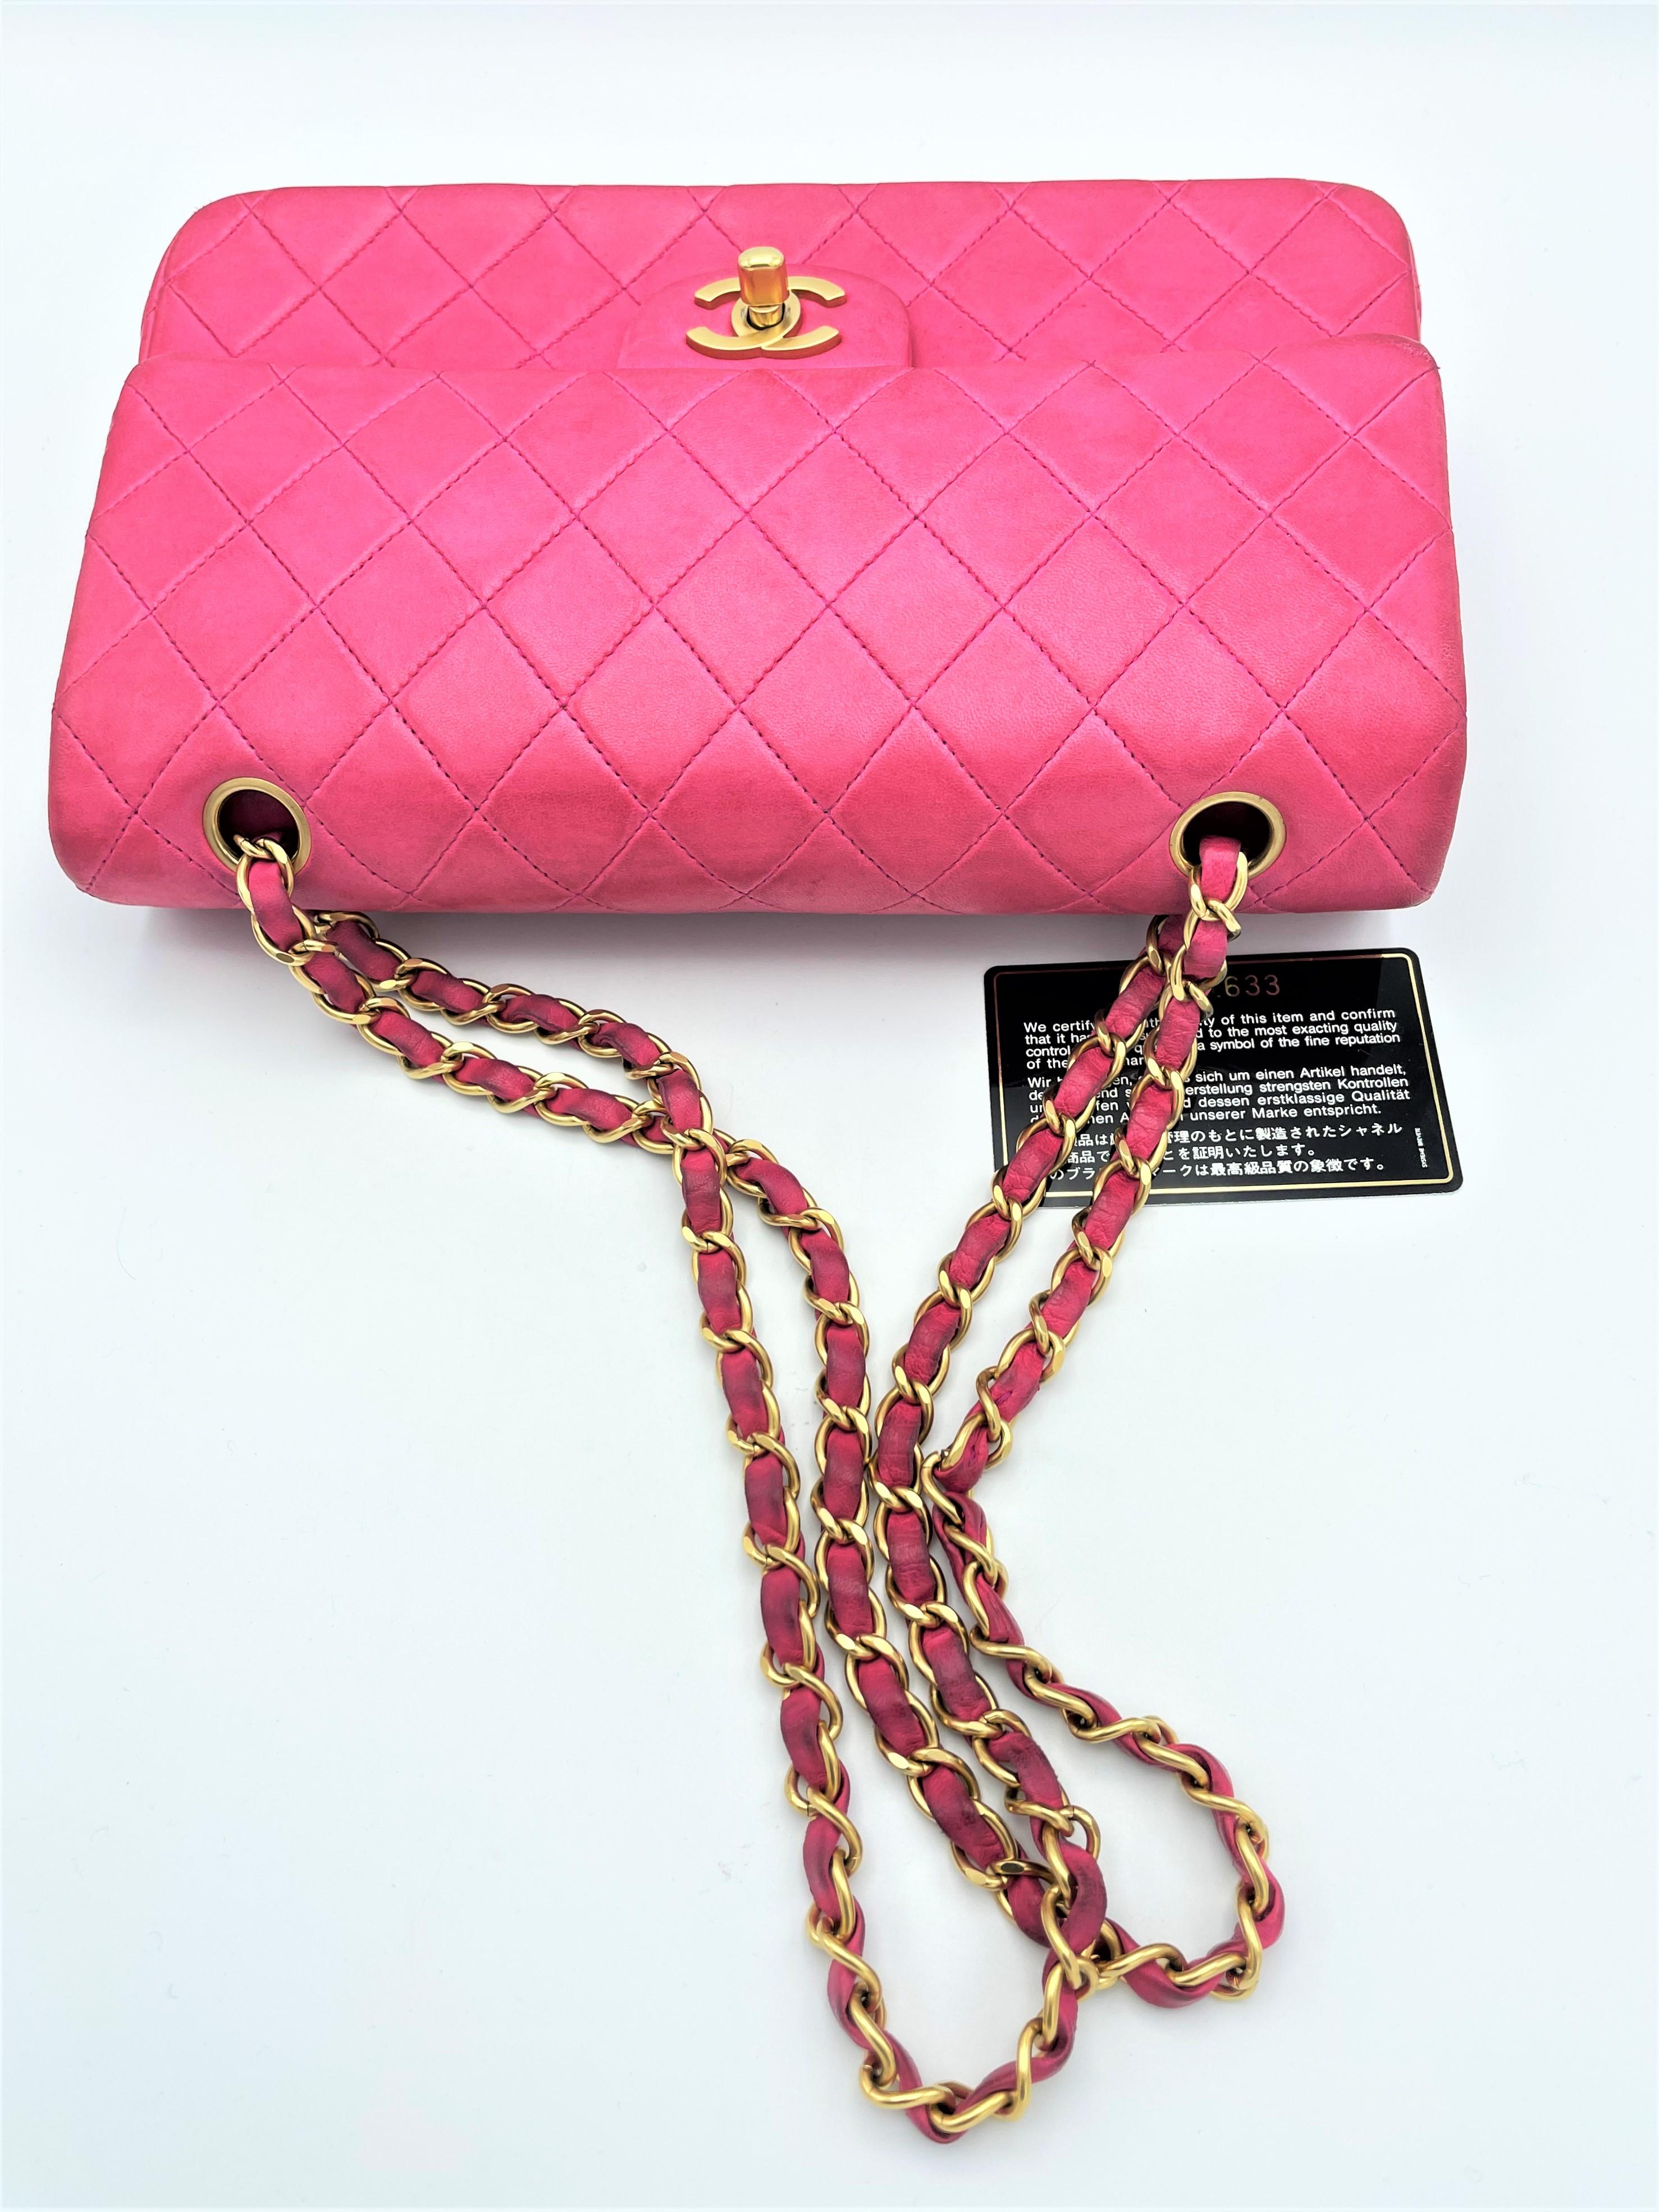 Vintage CHANEL quilted double flap bag, lambskin leather, medium in pink, 1995   2